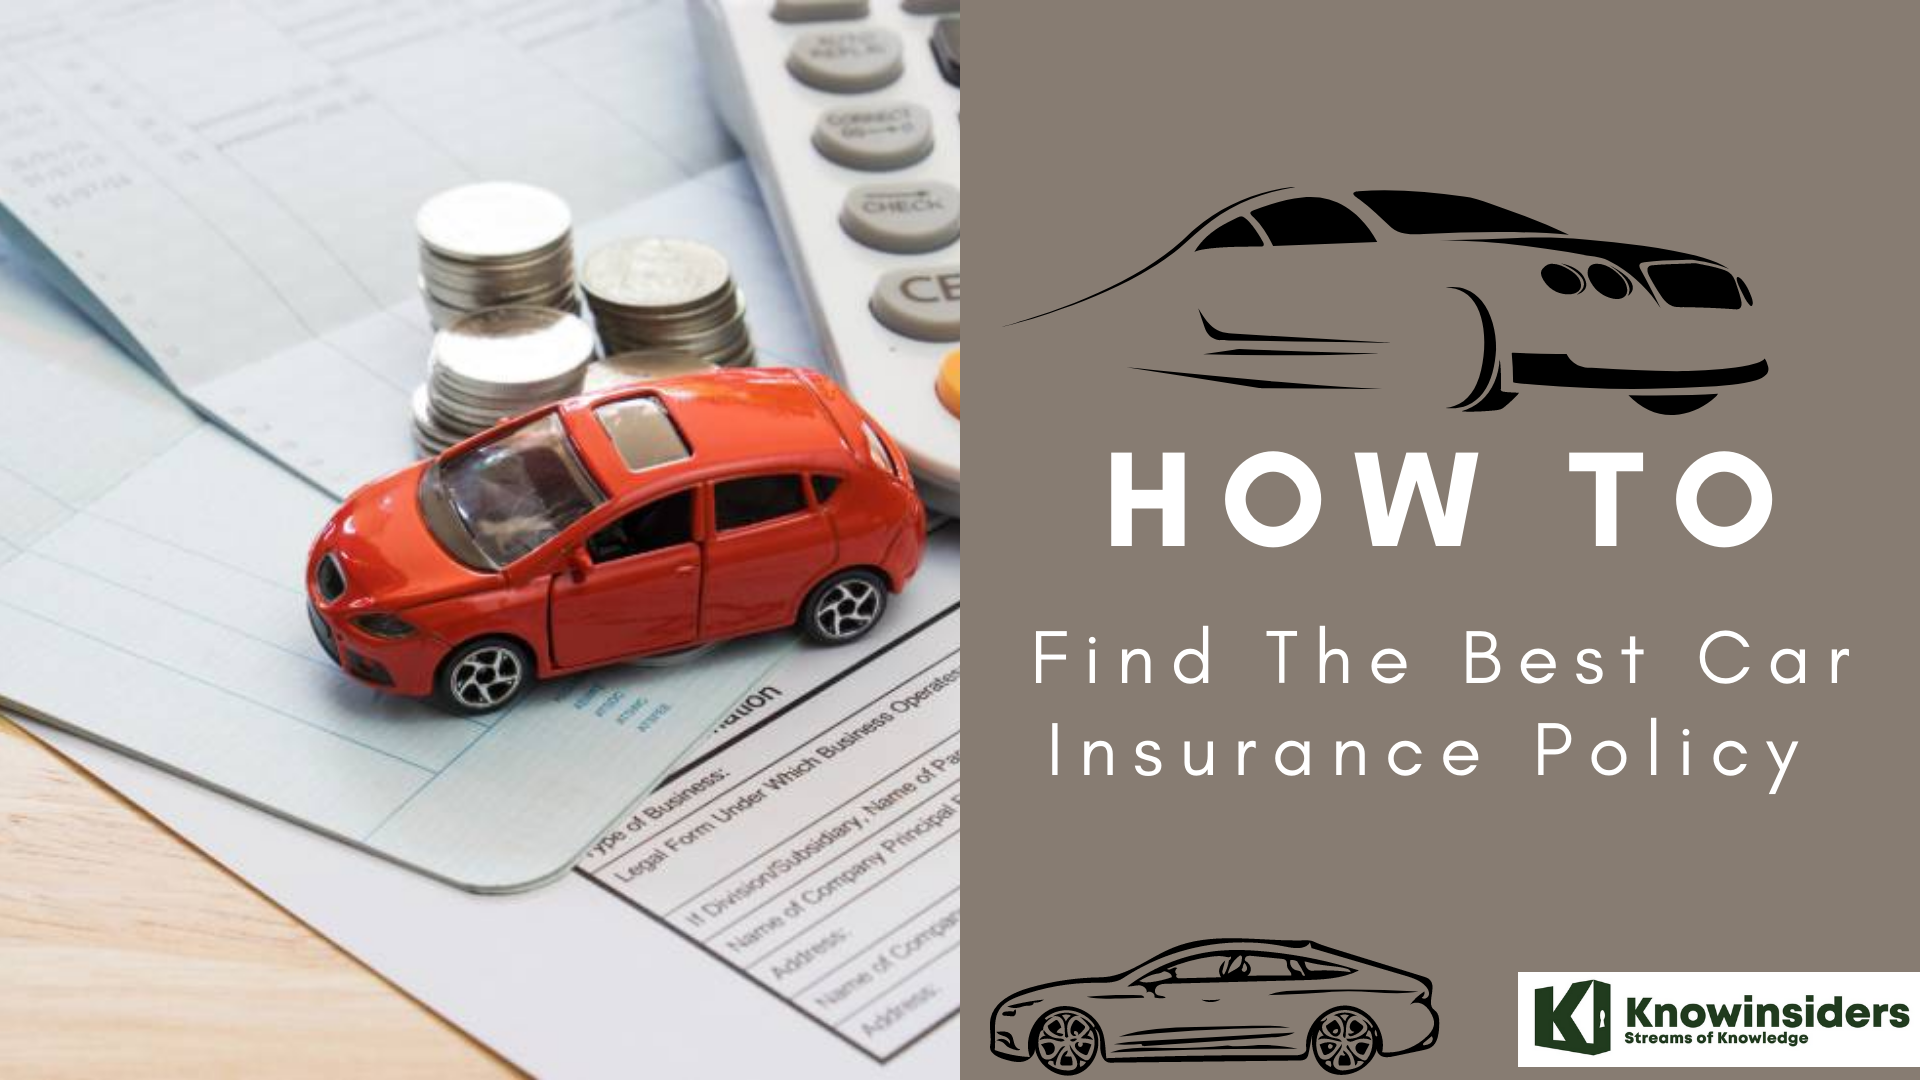 How To Find The Best Car Insurance?